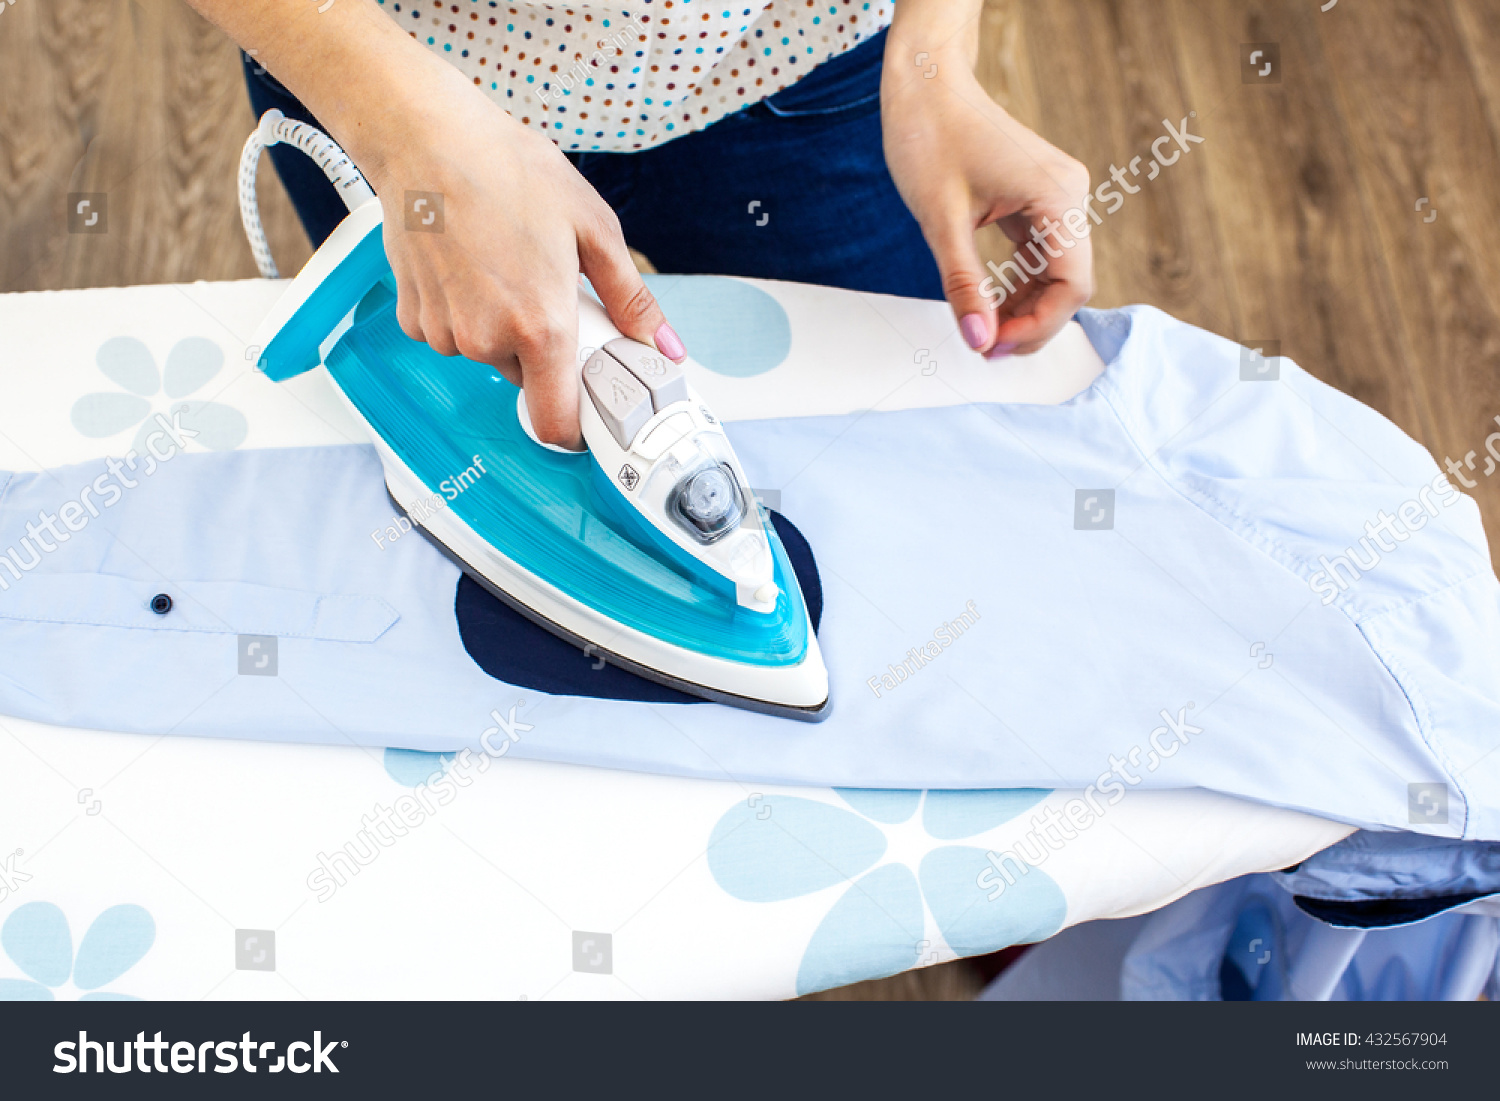 Closeup of woman ironing clothes on ironing board #432567904